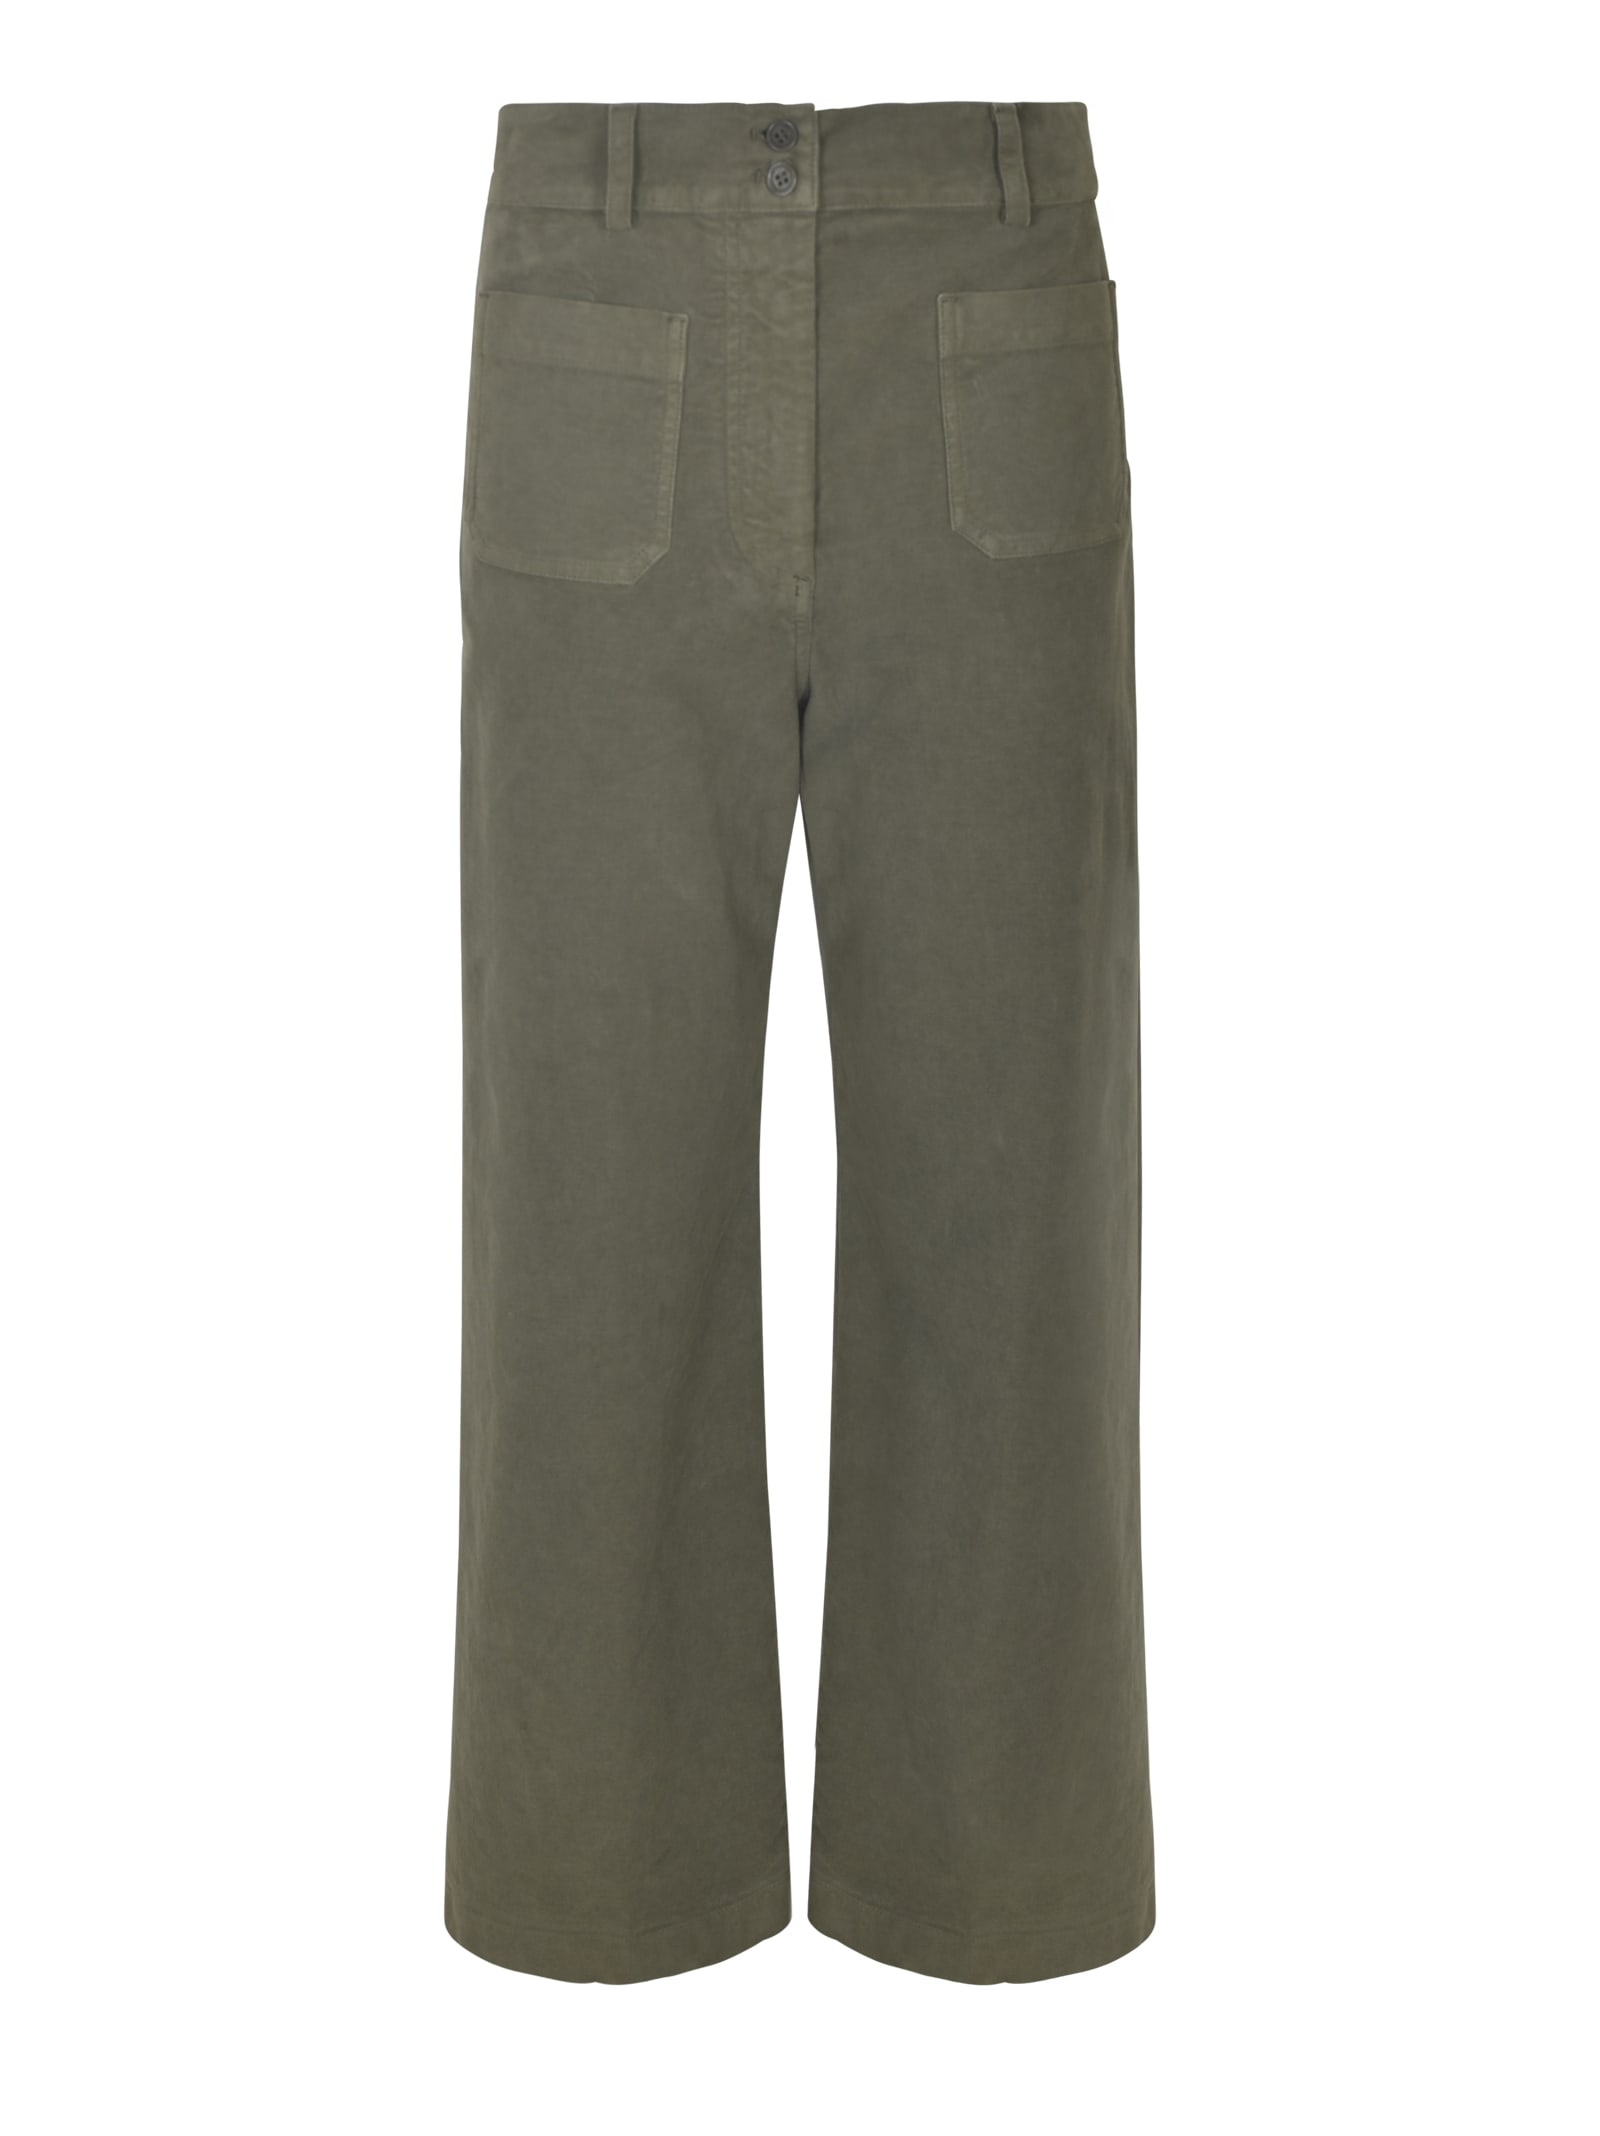 Military Green Trousers With Pockets